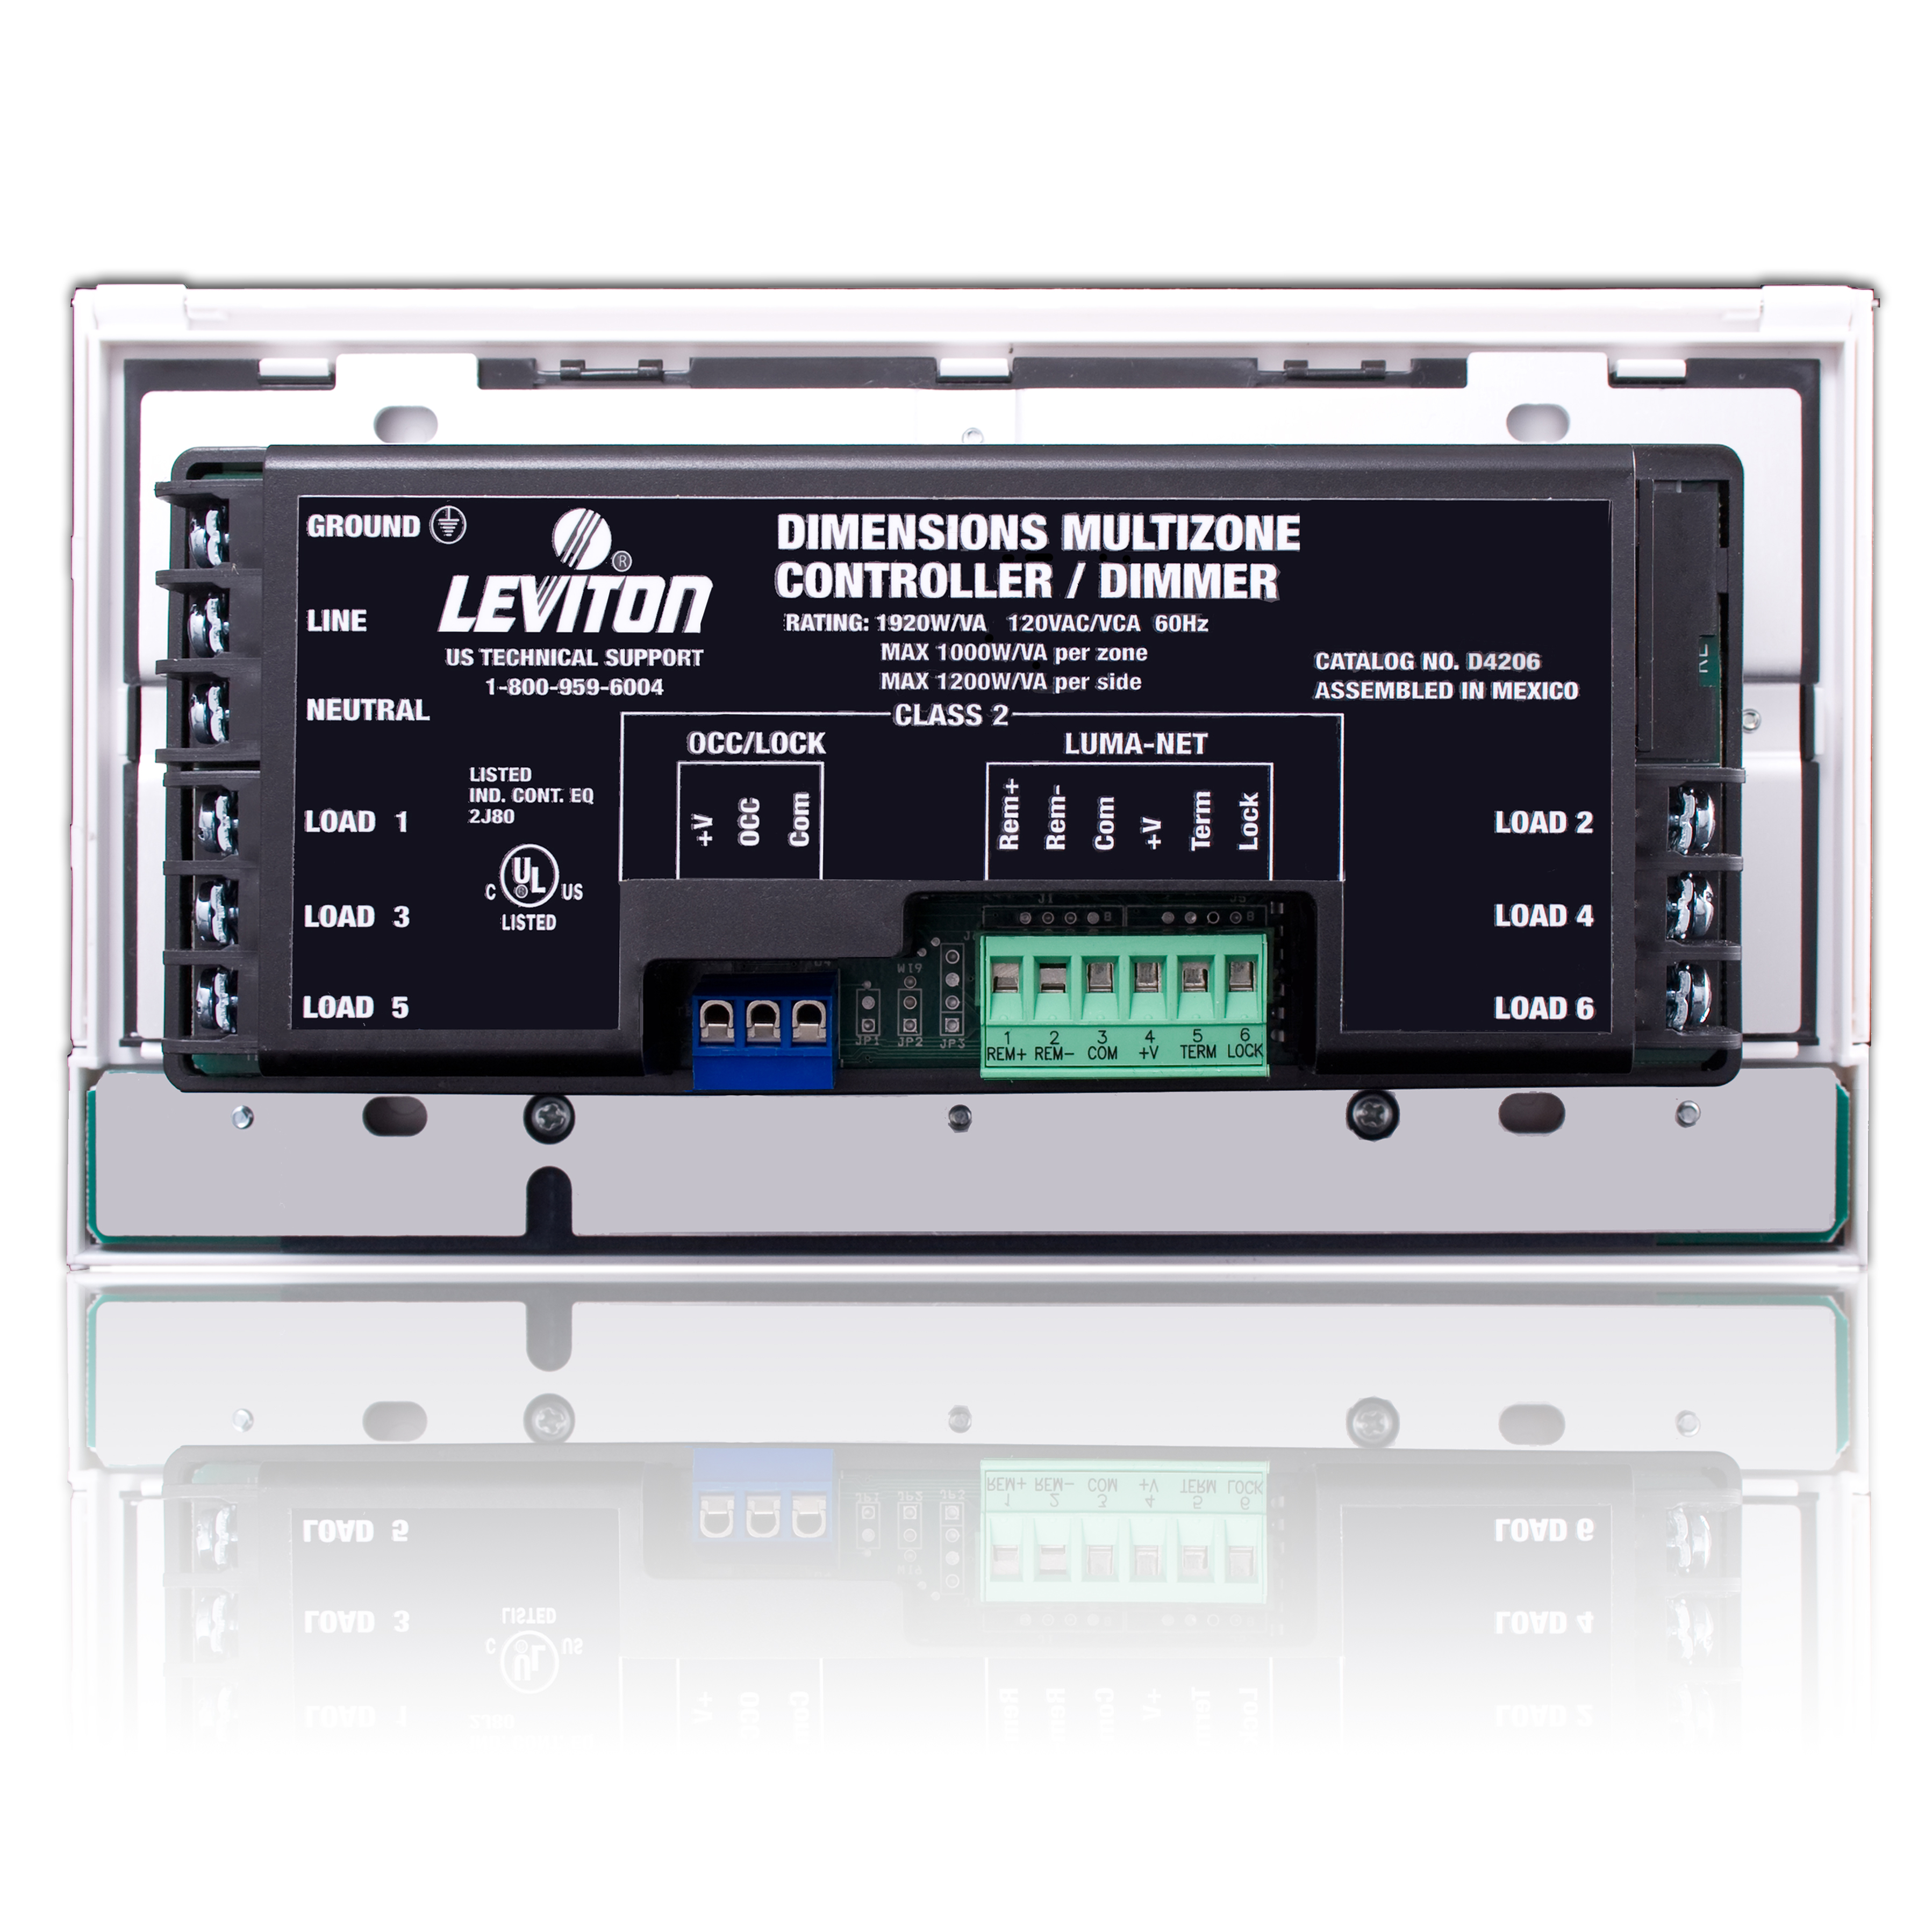 D4206-1LW 078477317747 Dimensions D4206 Lighting Controller for Luma-Net system. 6 120V Dimmers. 32 Channels. 20A 120V Input.